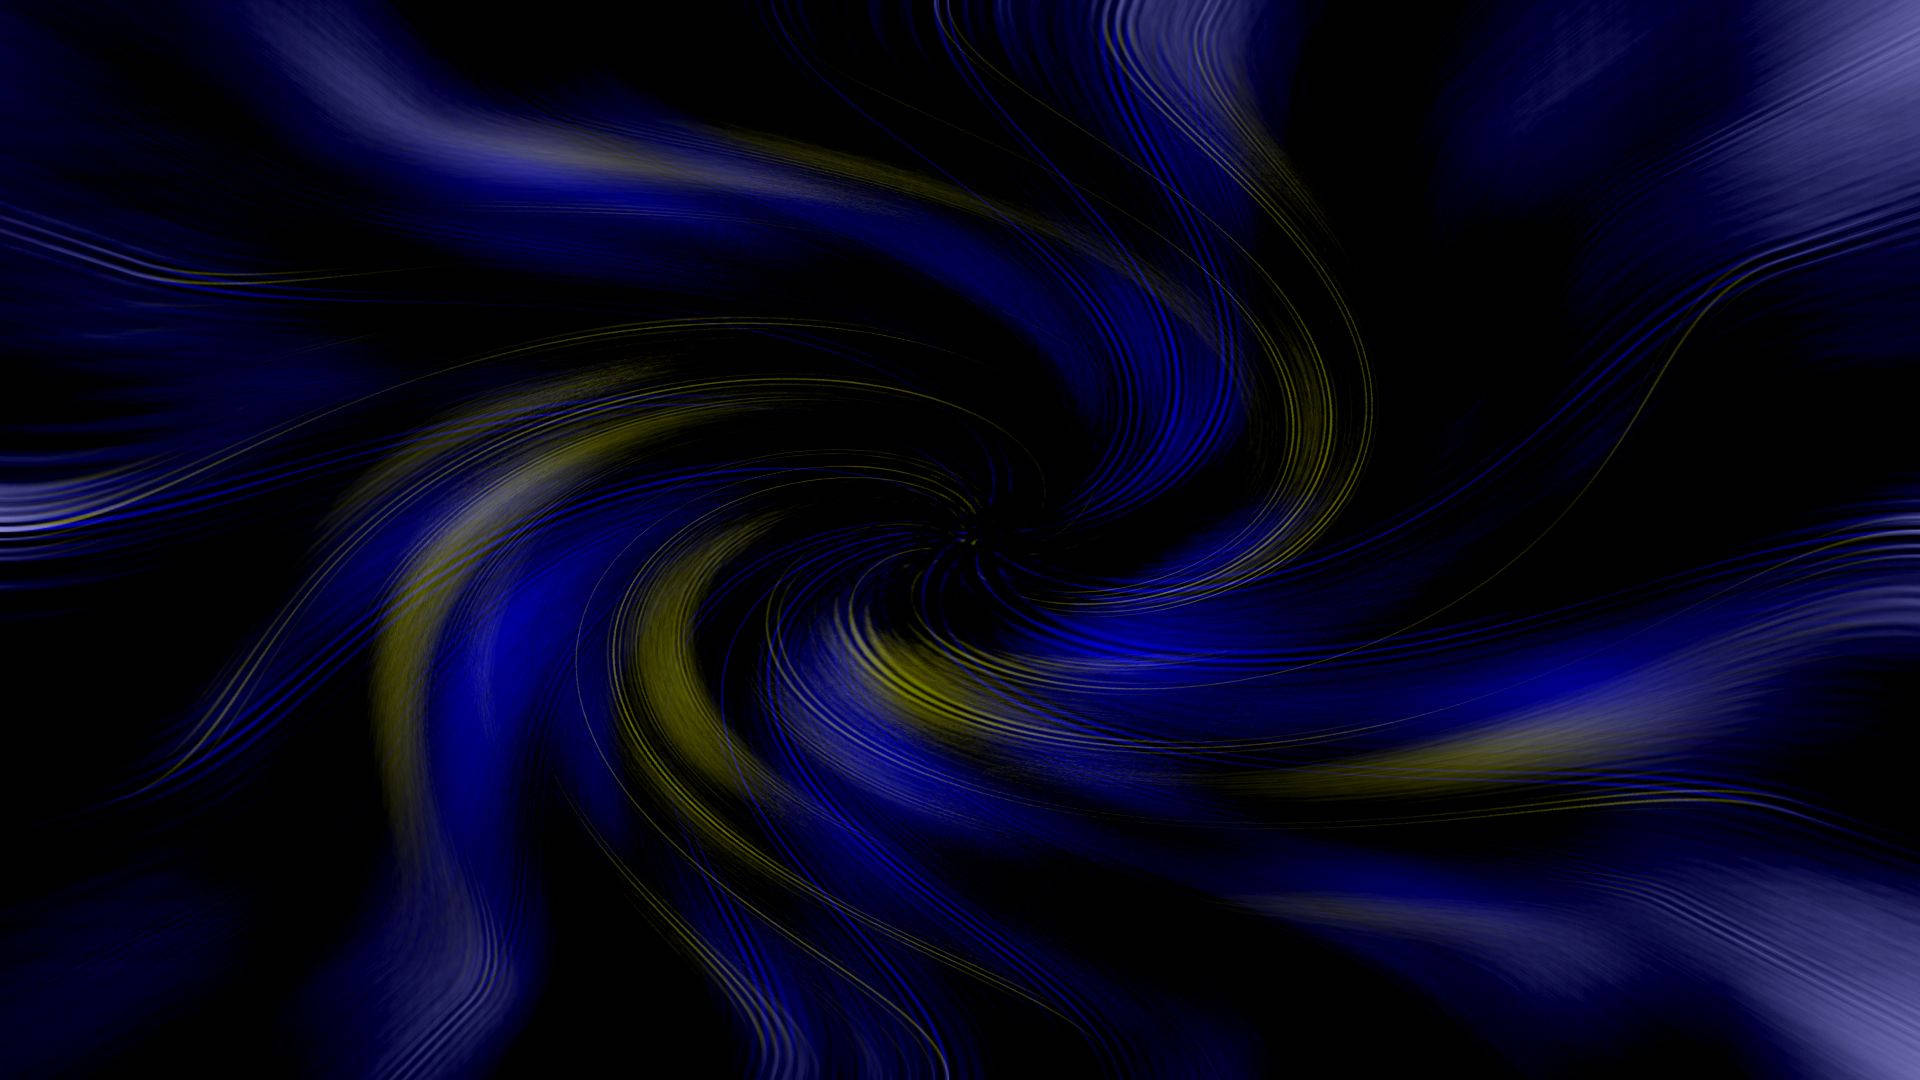 Blue And Gold Swirl Wallpaper